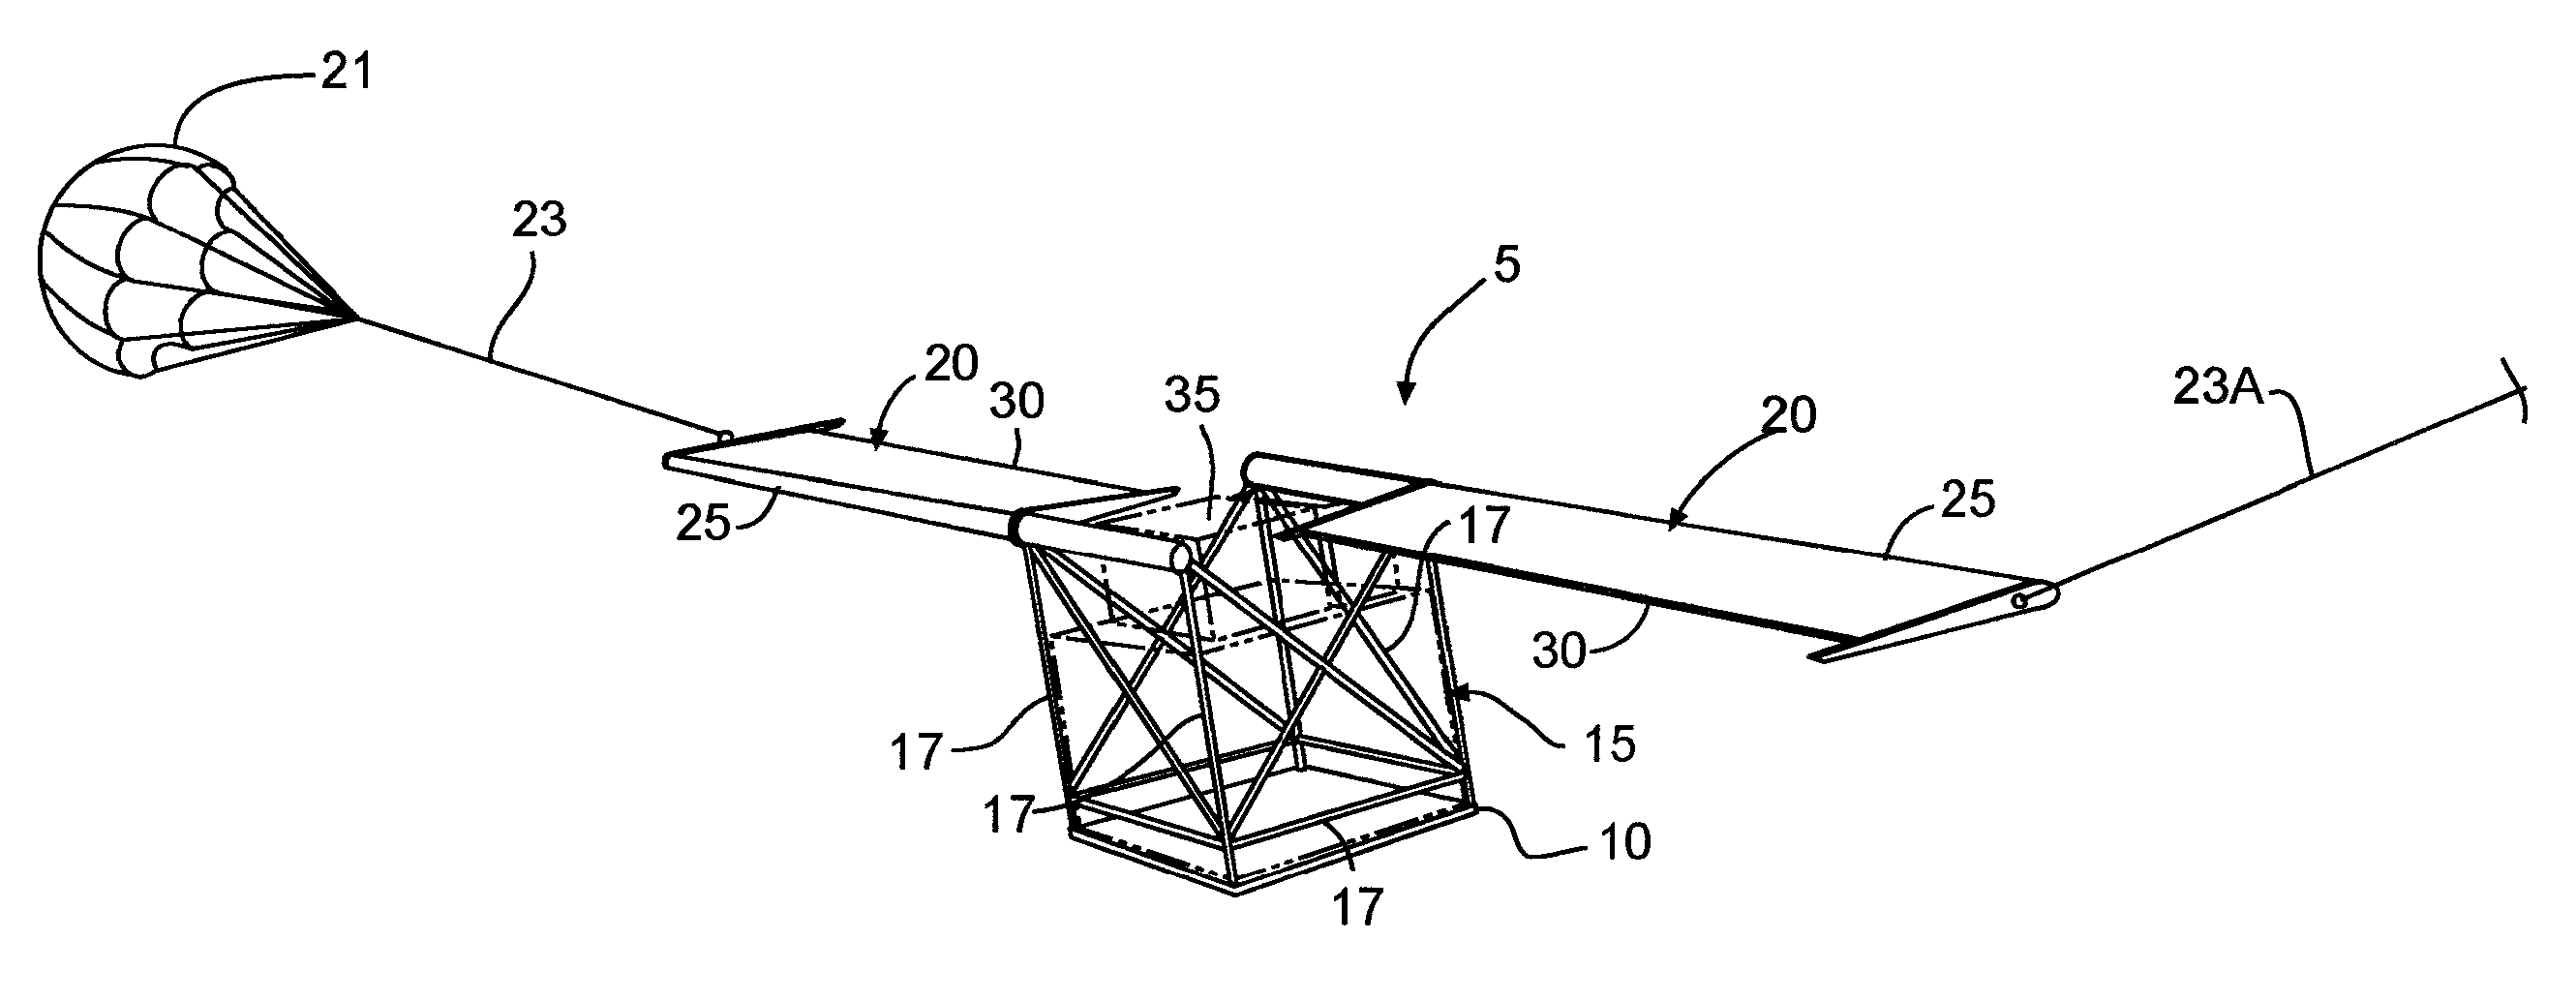 Rotating air cargo delivery system and method of construction